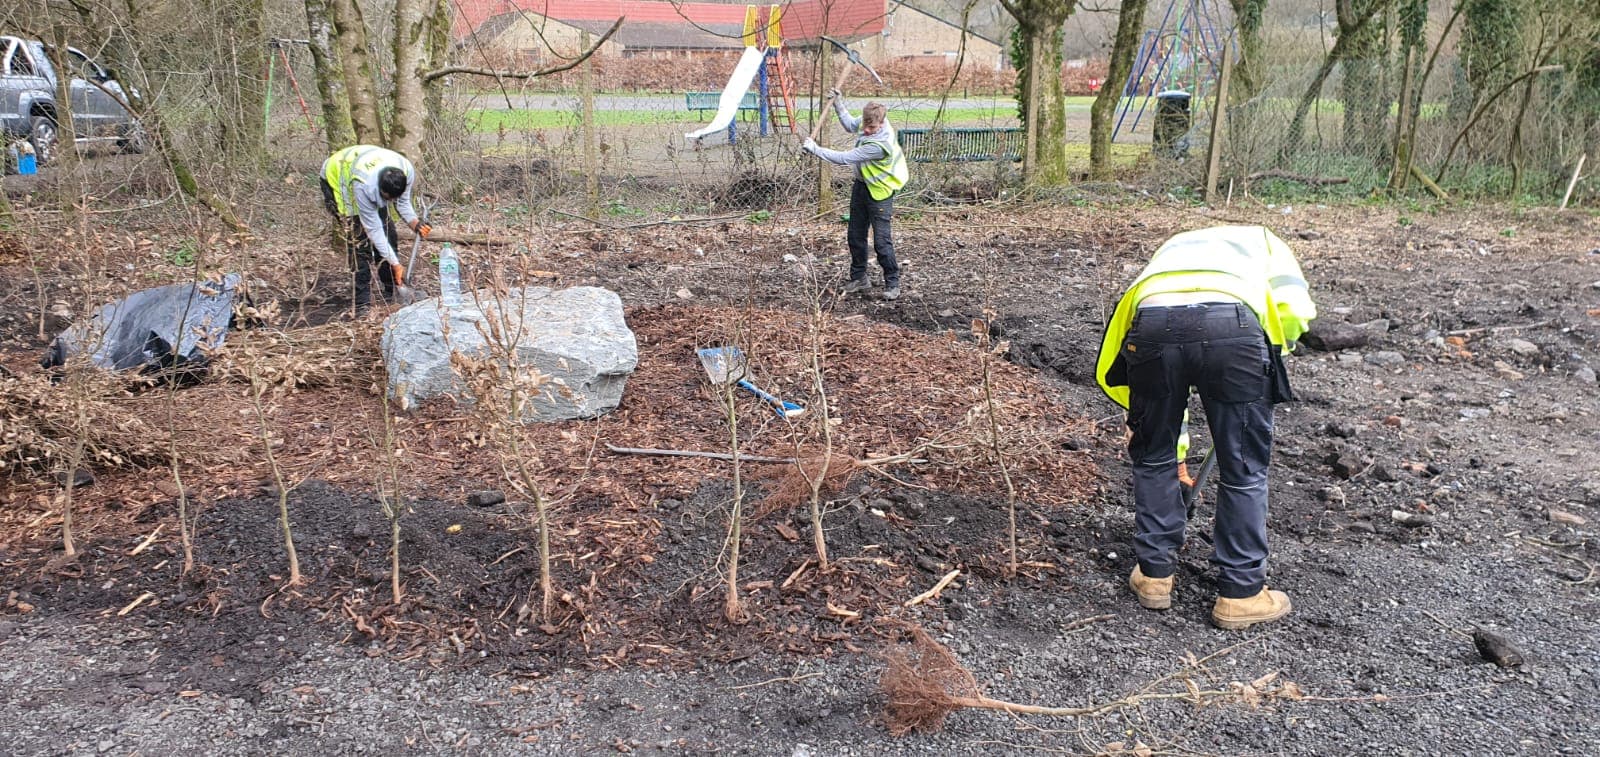 Aberbeeg tree planting – over 350 native species trees planted in very difficult ground and weather conditions: